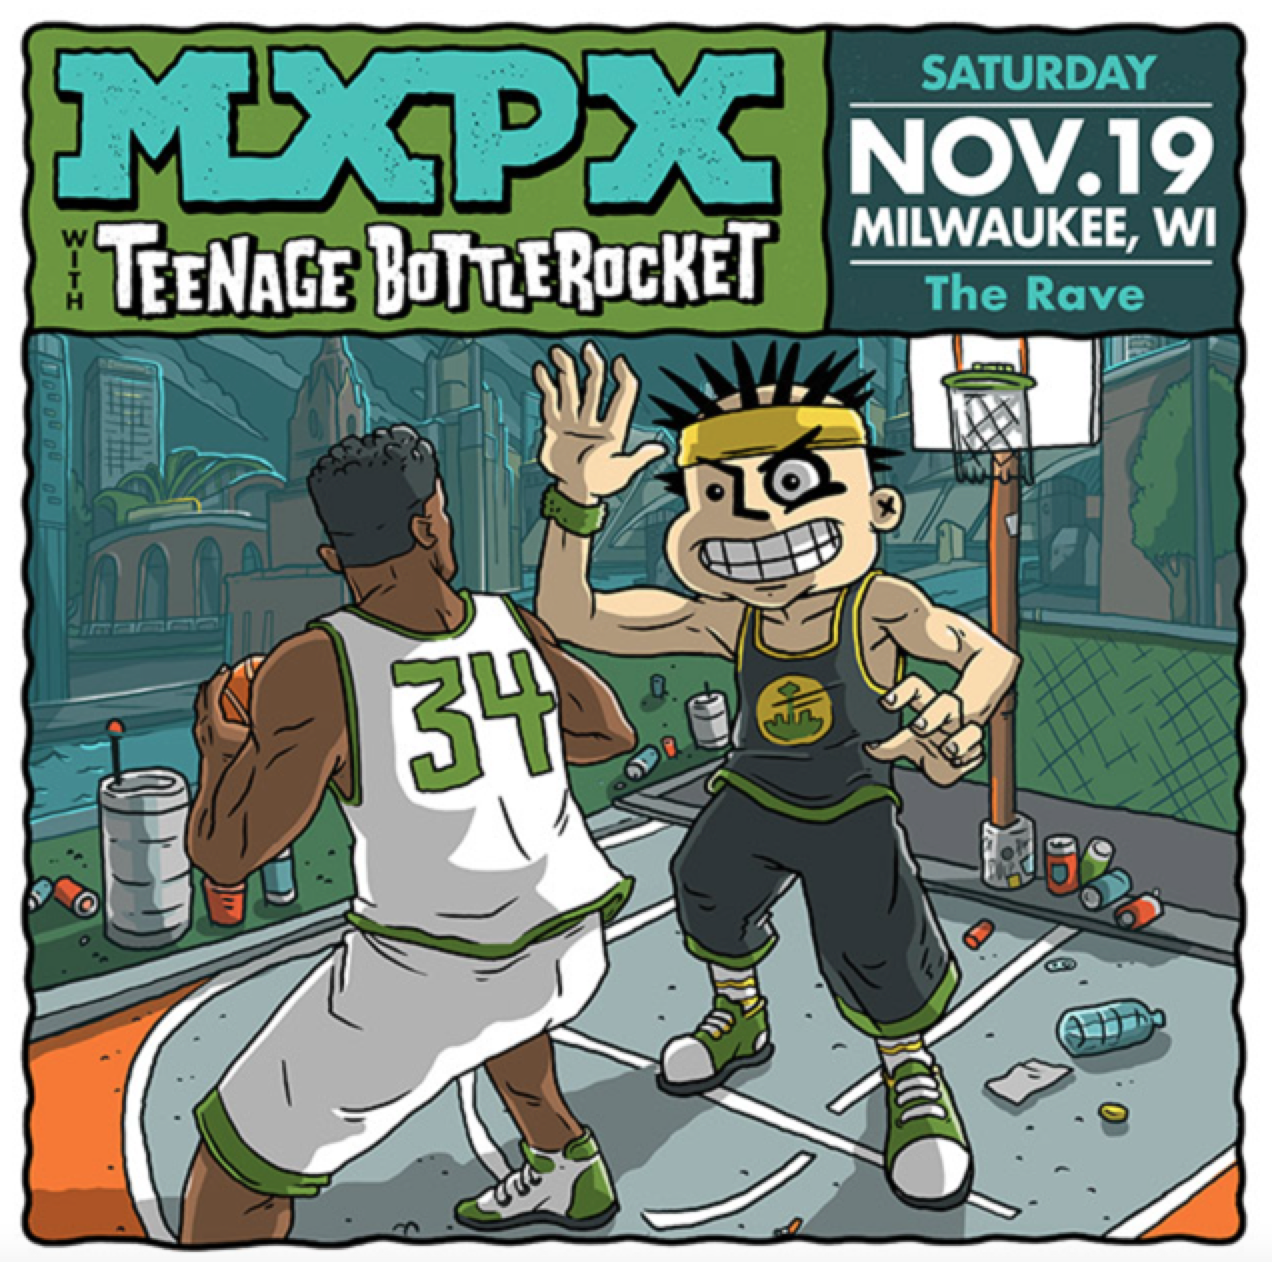 Book your MxPx parking with ParqEx!